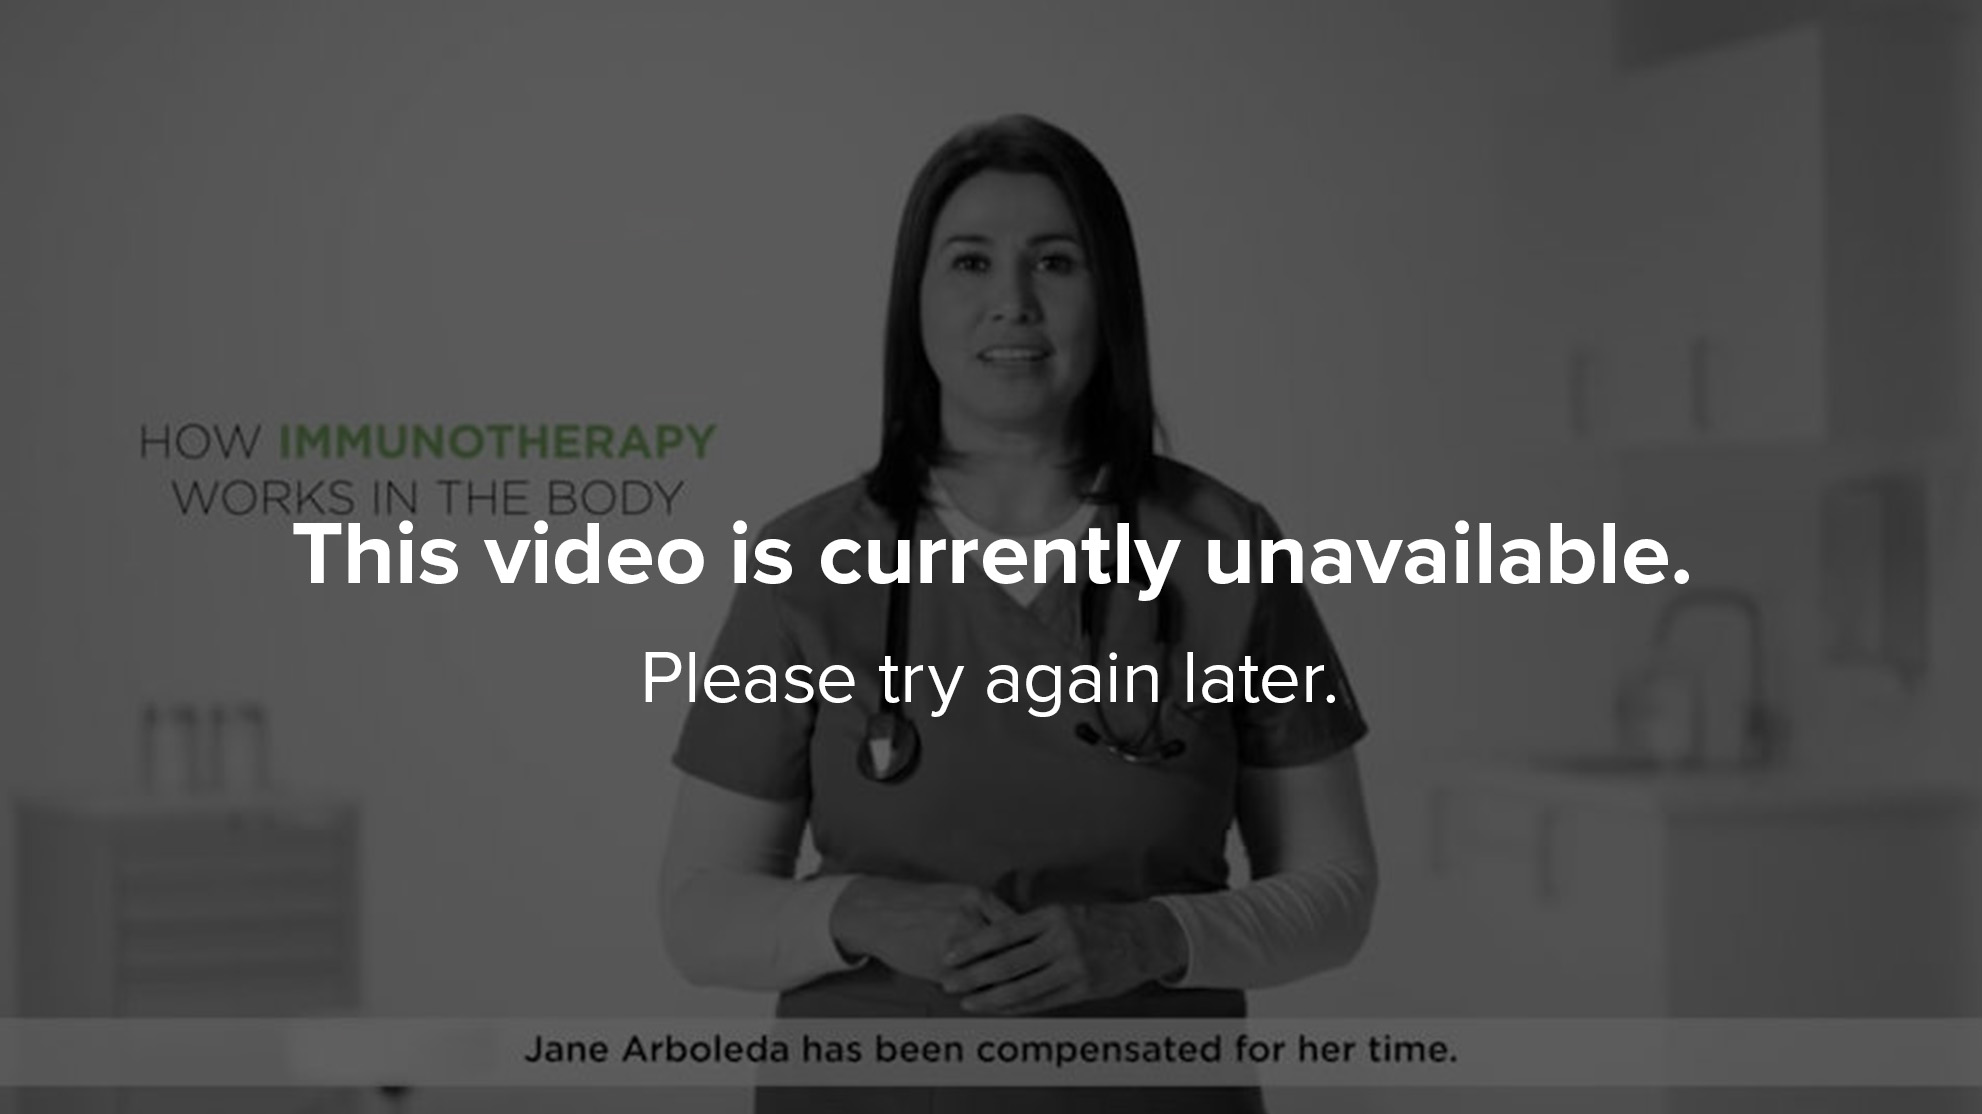 Video Not Available